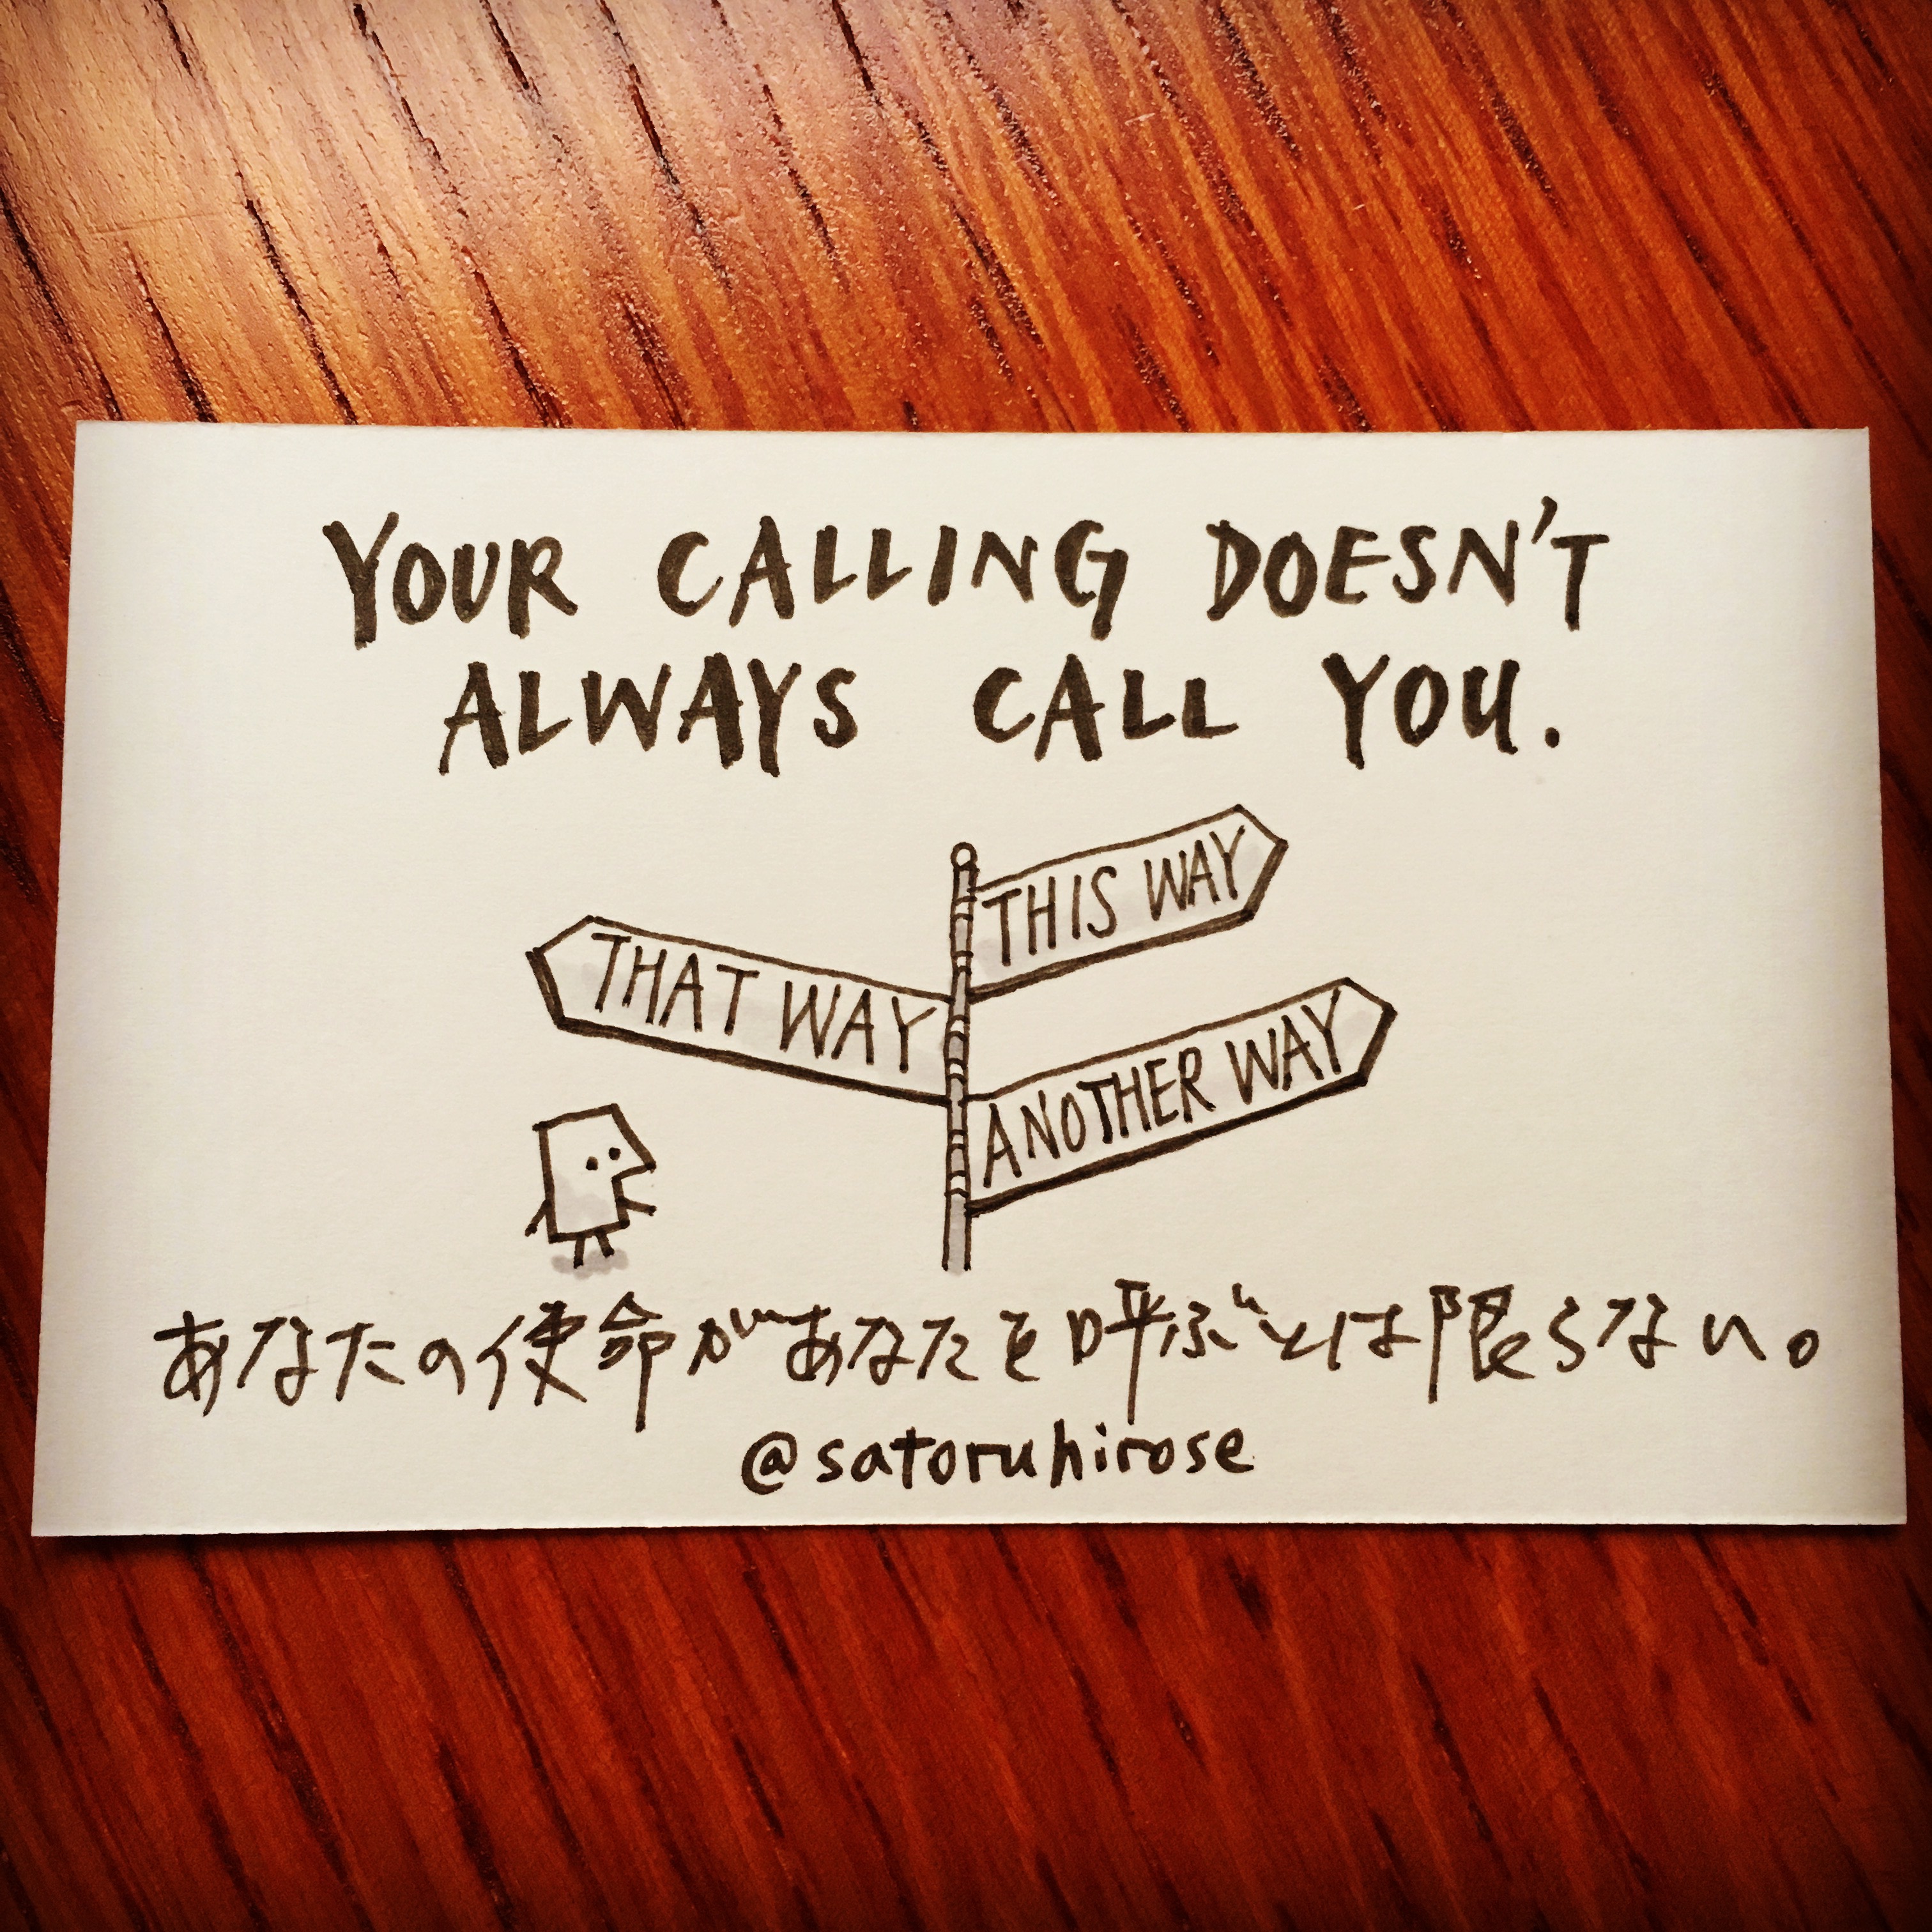 Your calling doesn't always call you.